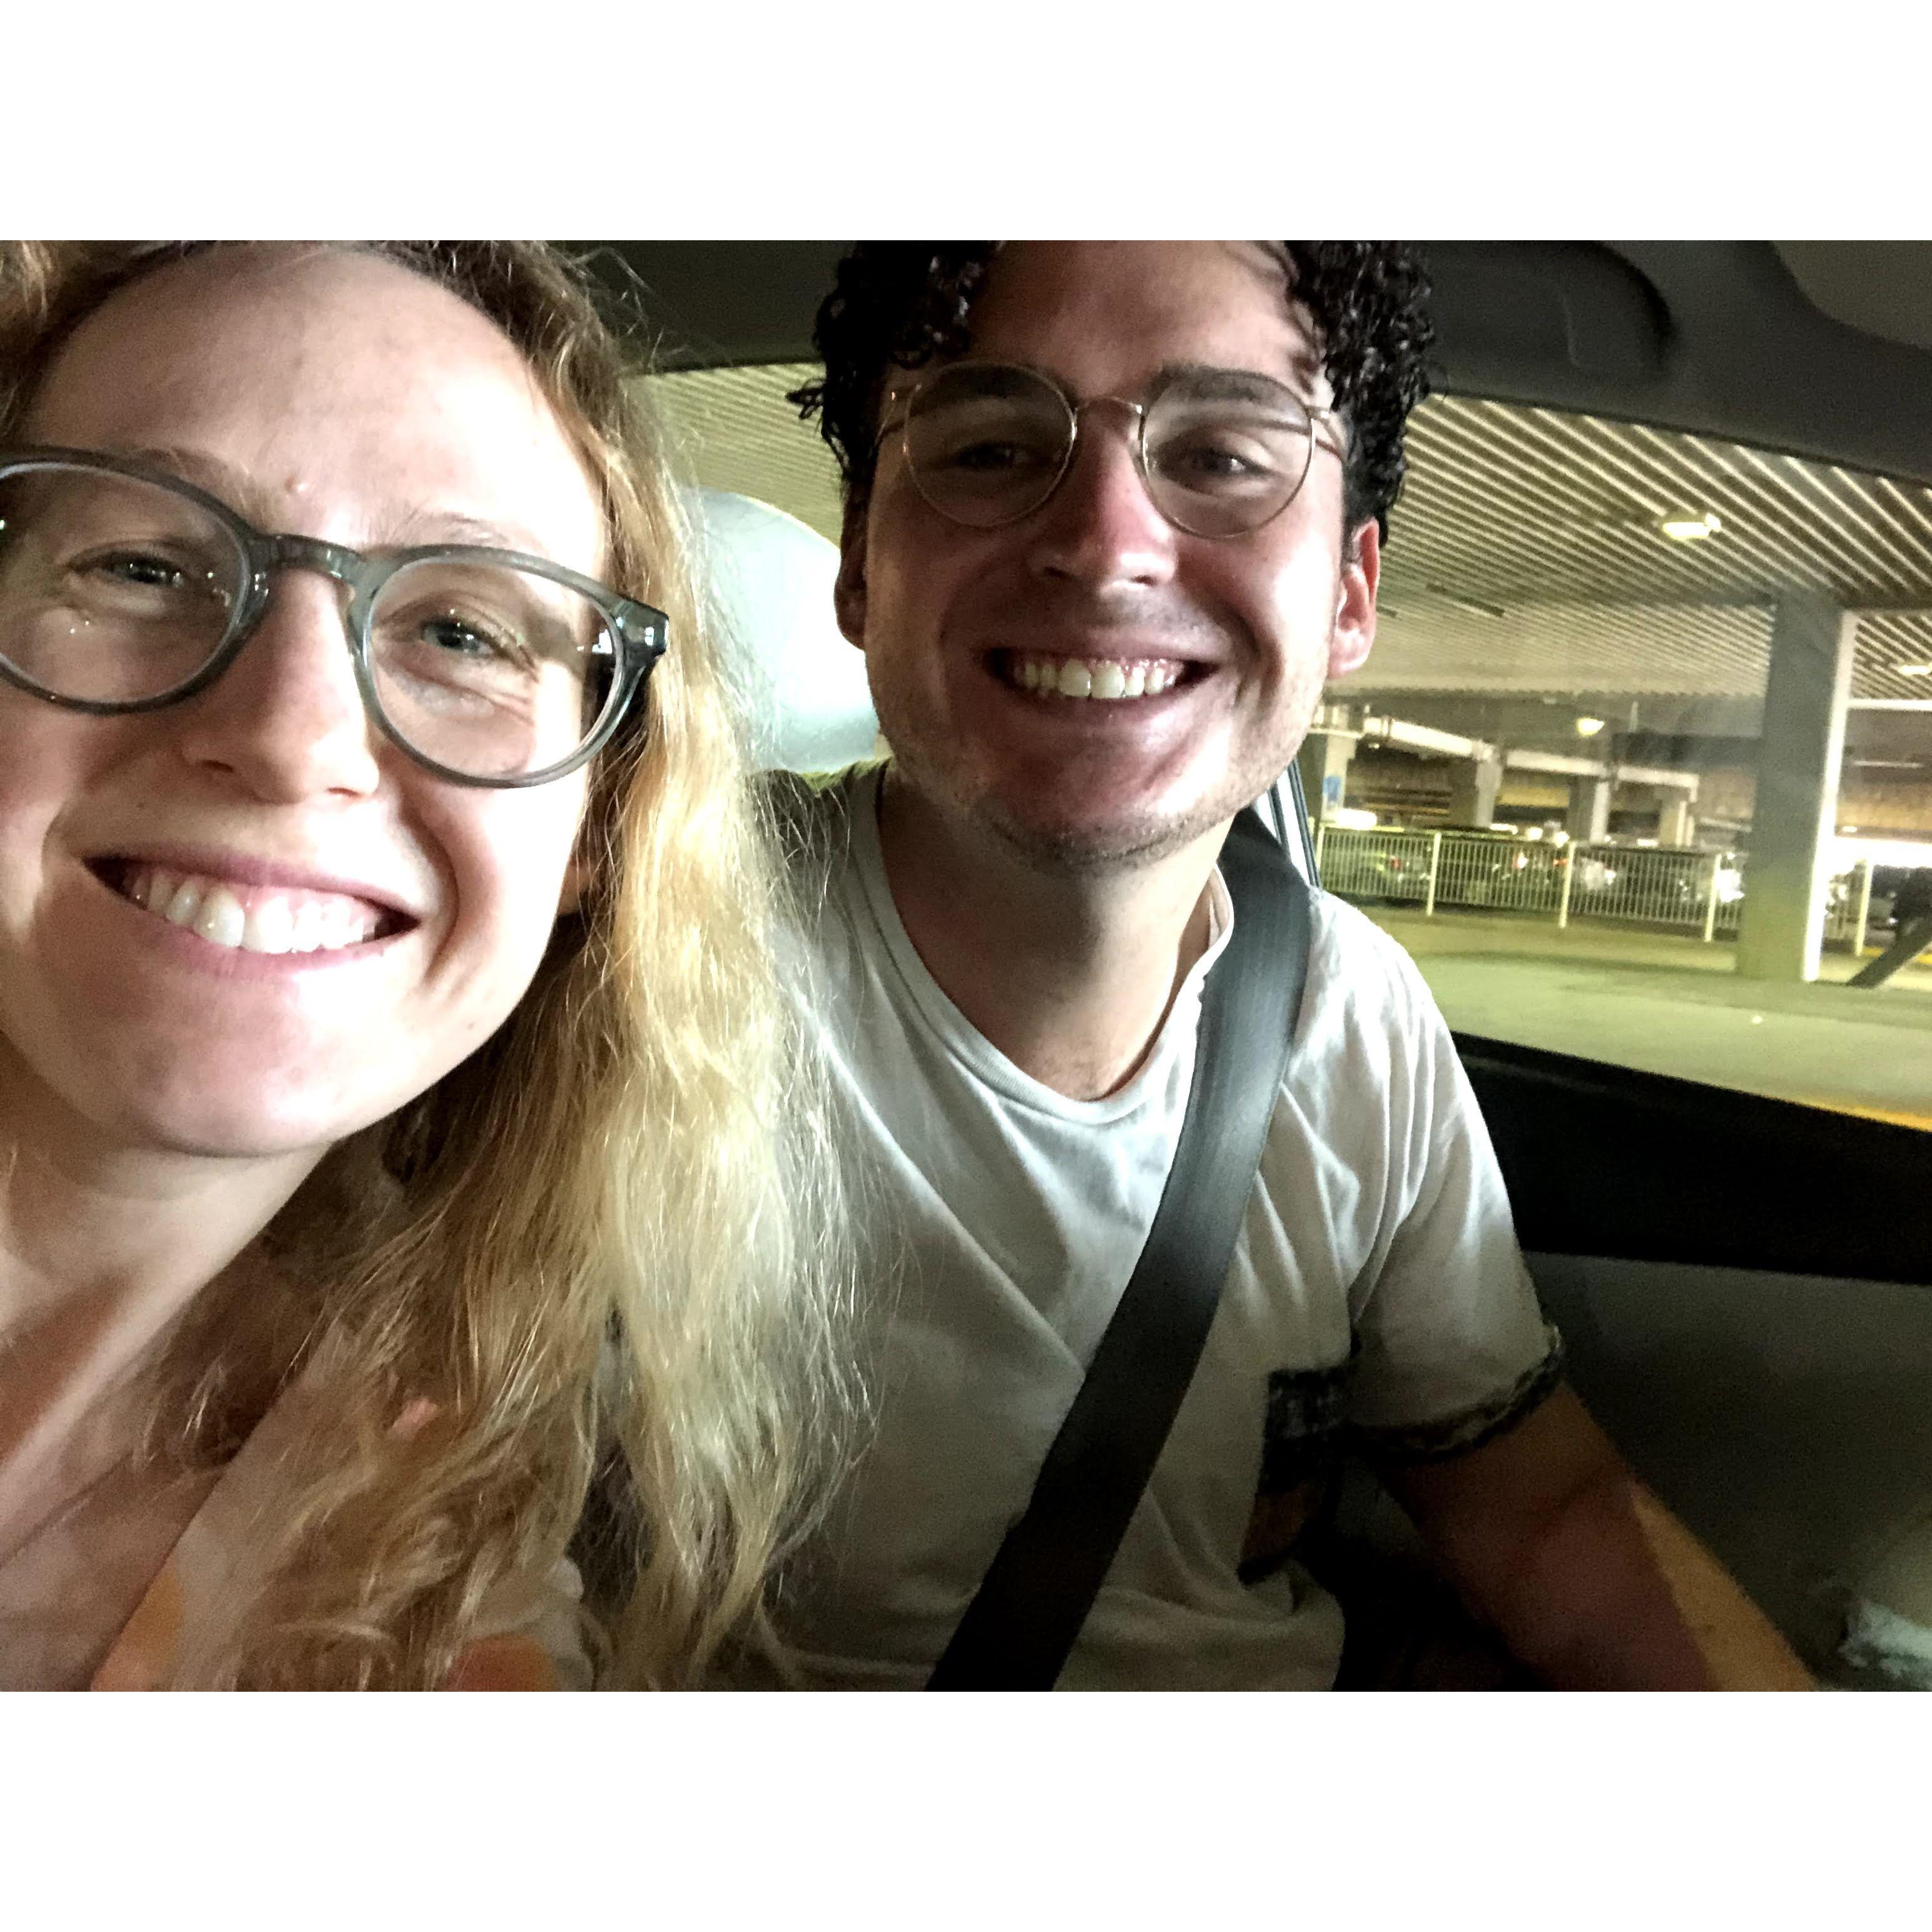 Our reunion at the Denver airport after a few months of individual adventures